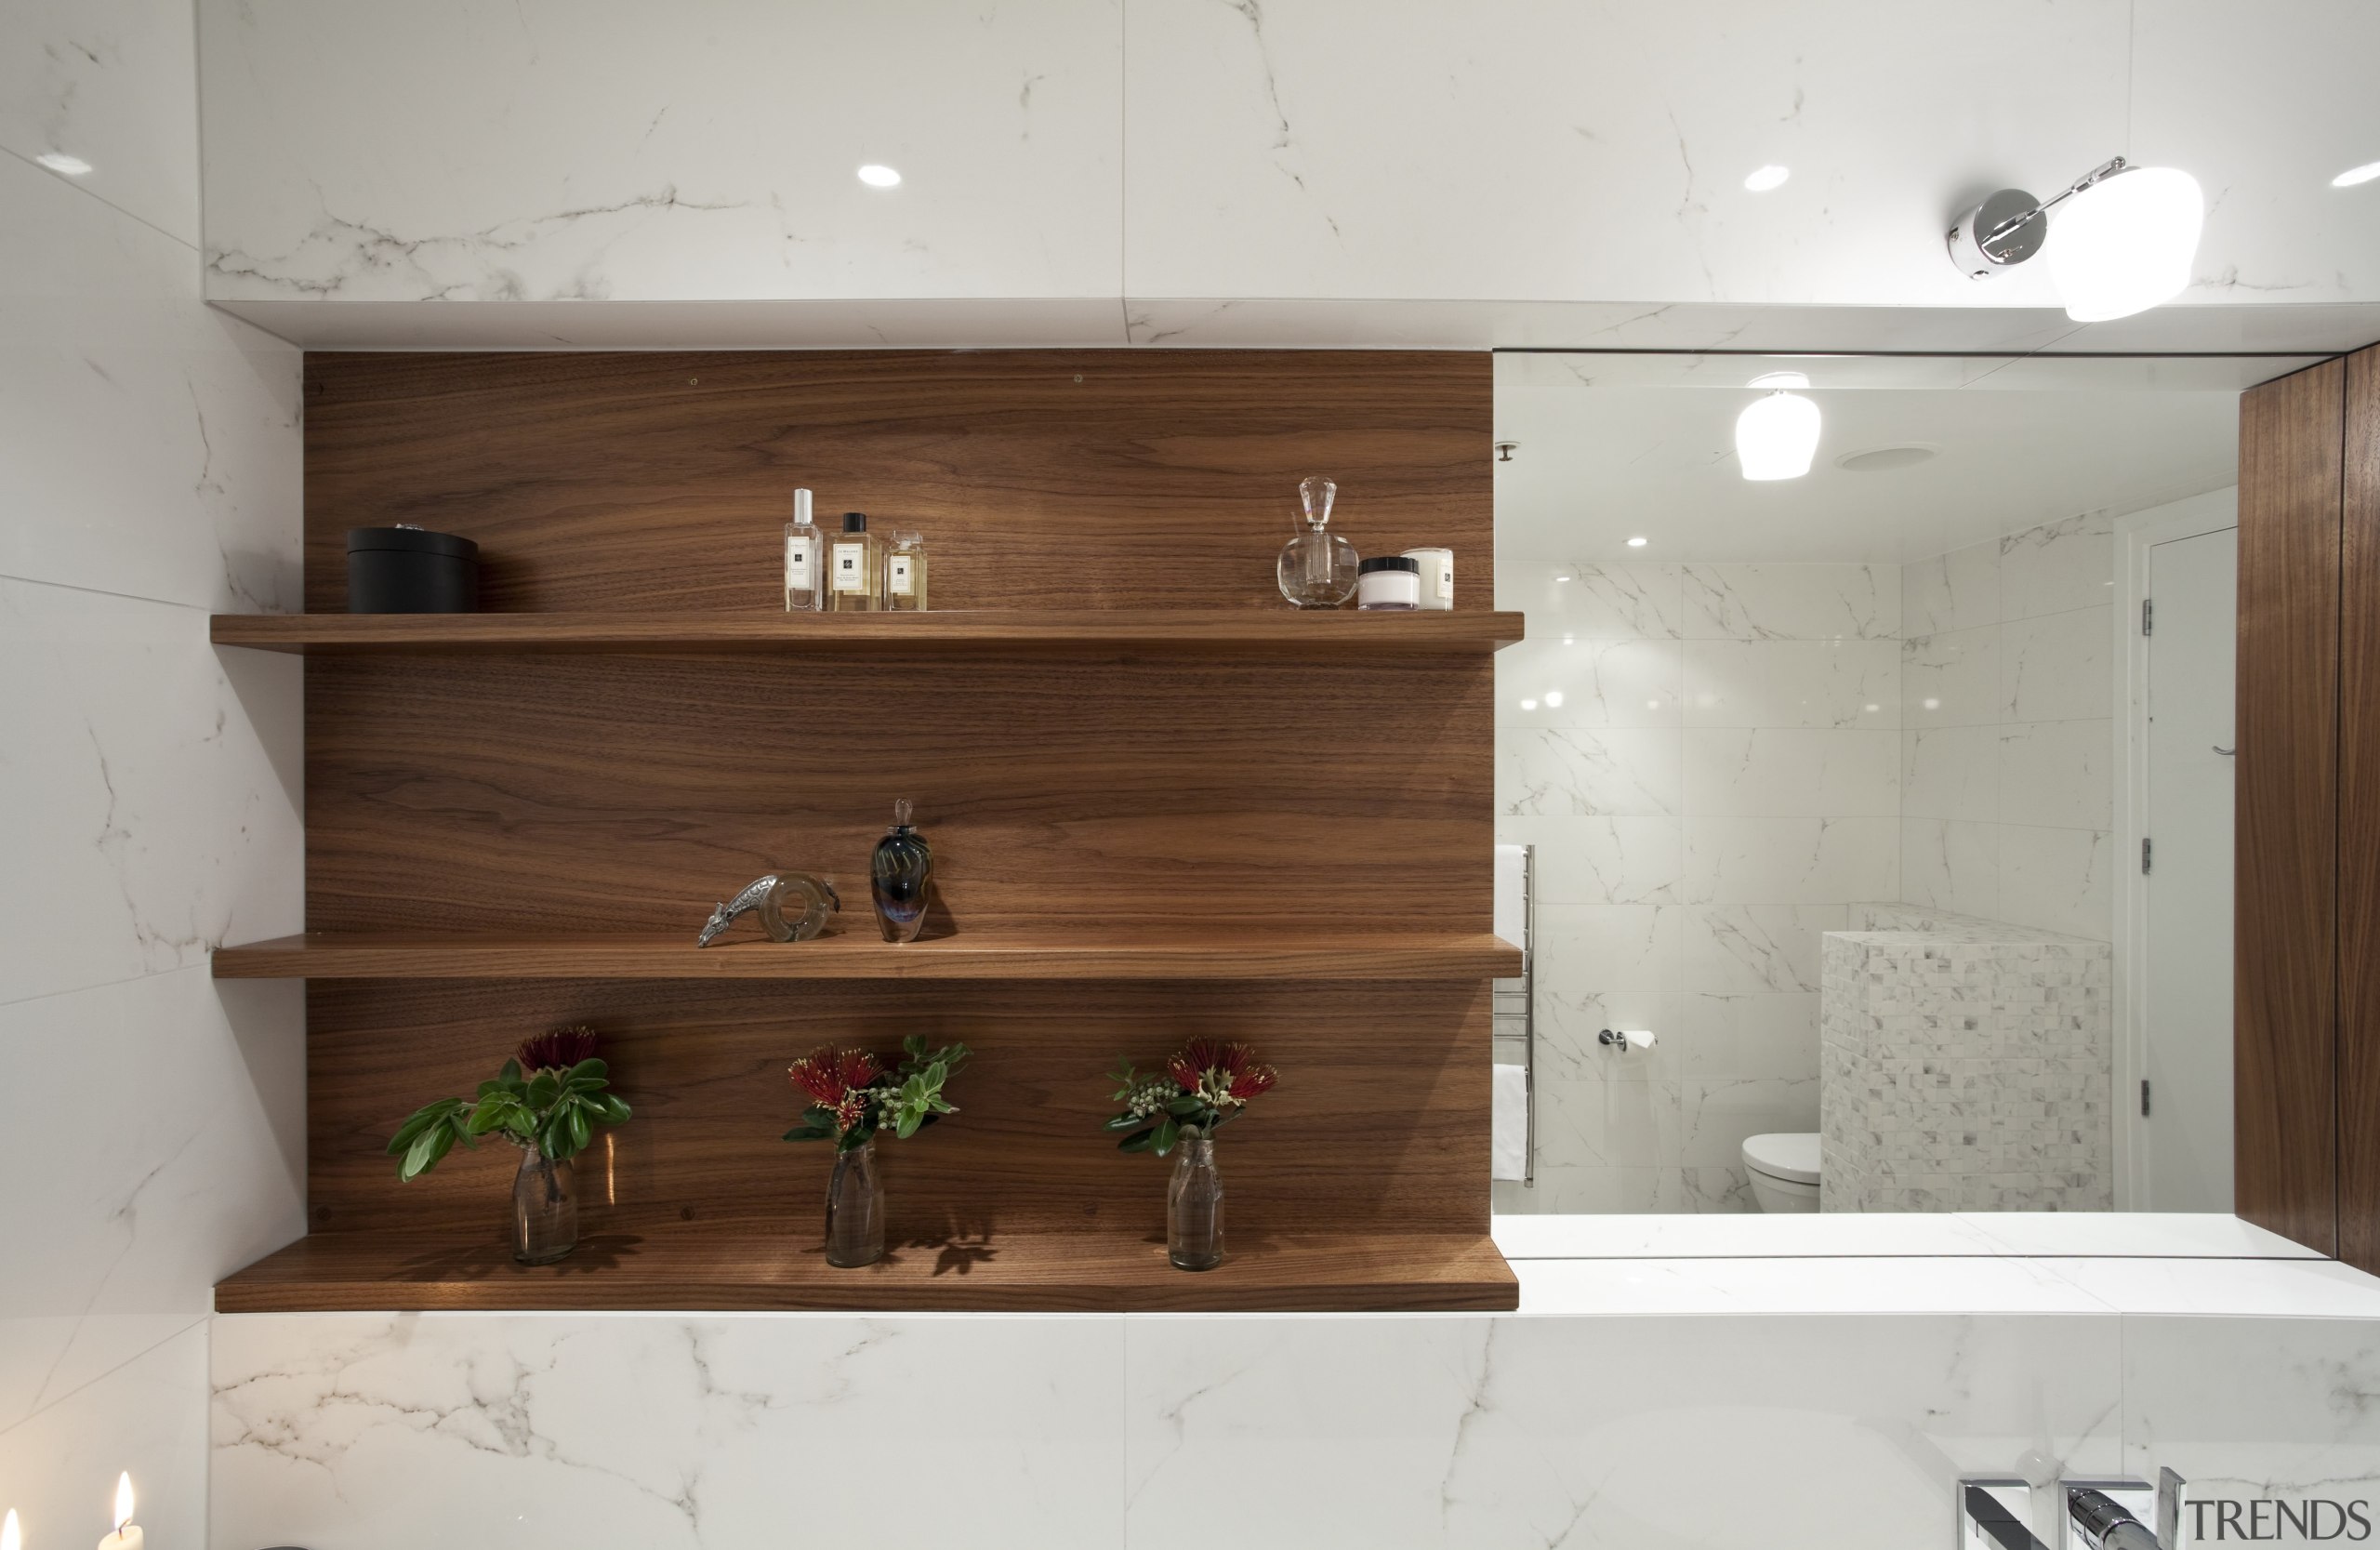 Light touch  penthouse bathroom remodel by Von cabinetry, furniture, interior design, shelf, shelving, wall, wood, gray, brown